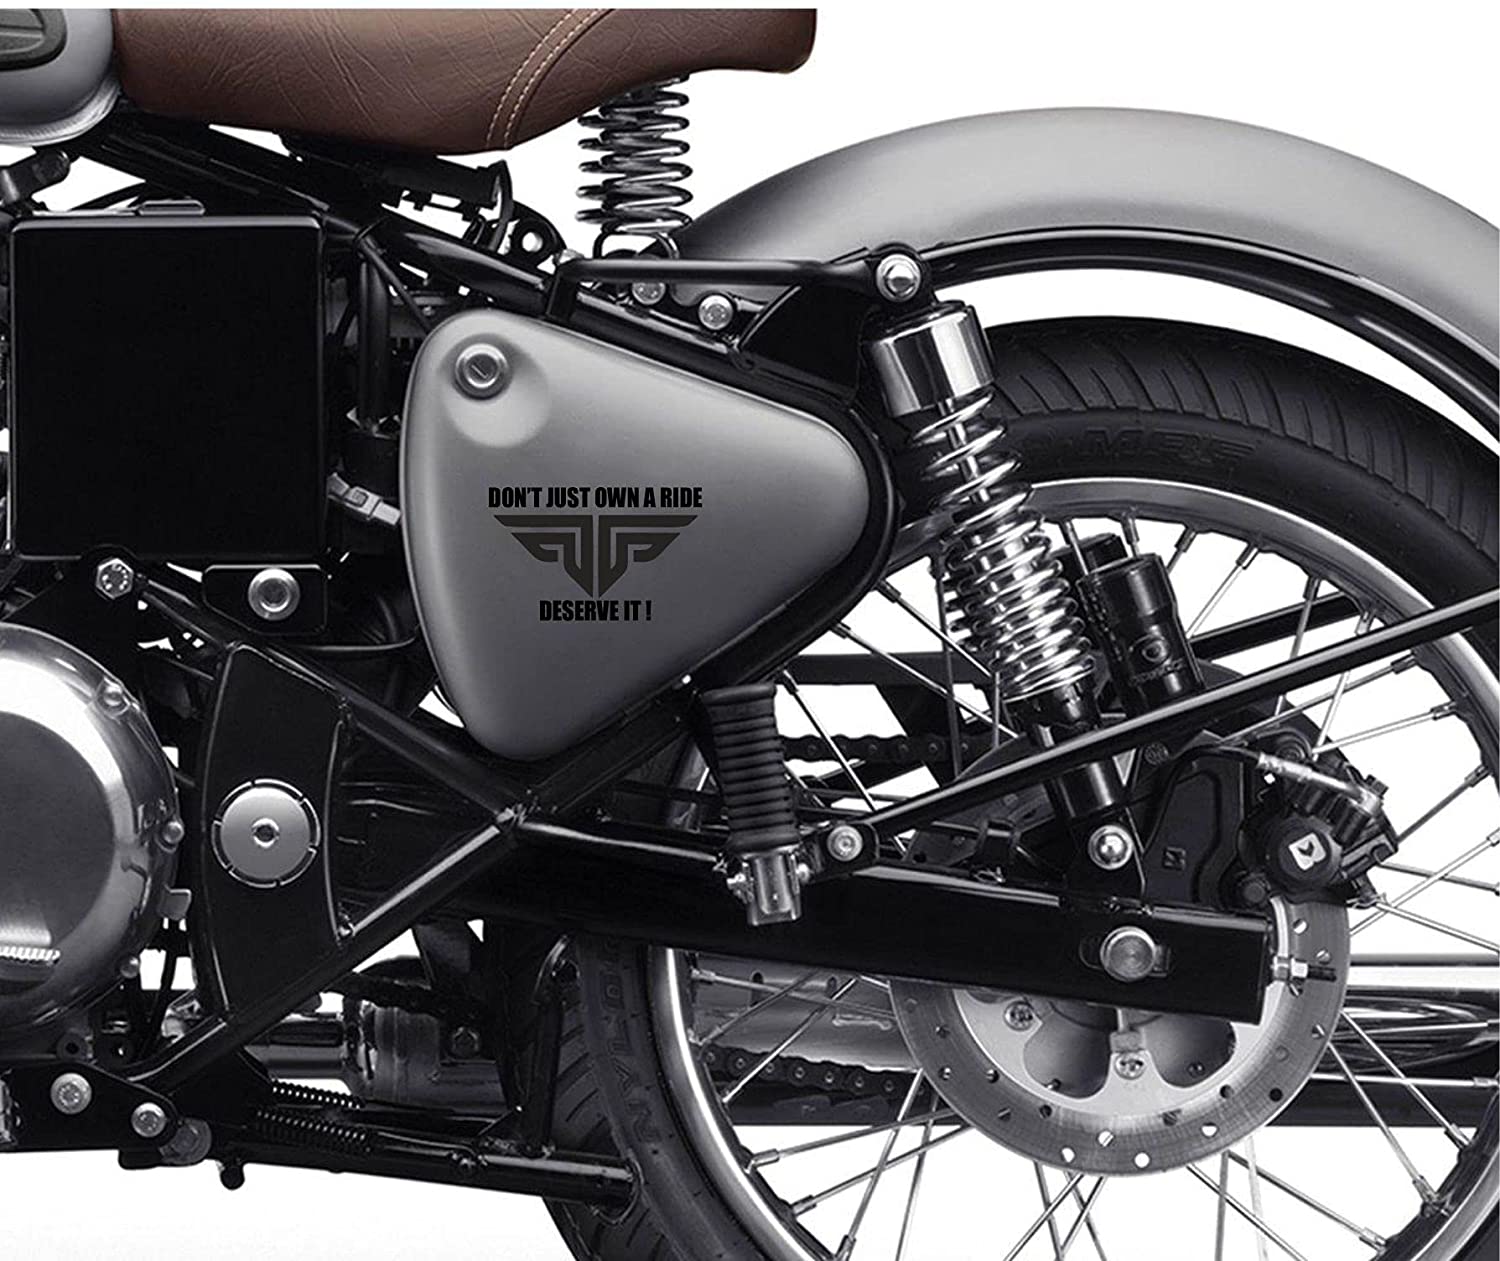 royal enfield quotes stickers and decals at lowest prices shop now ...